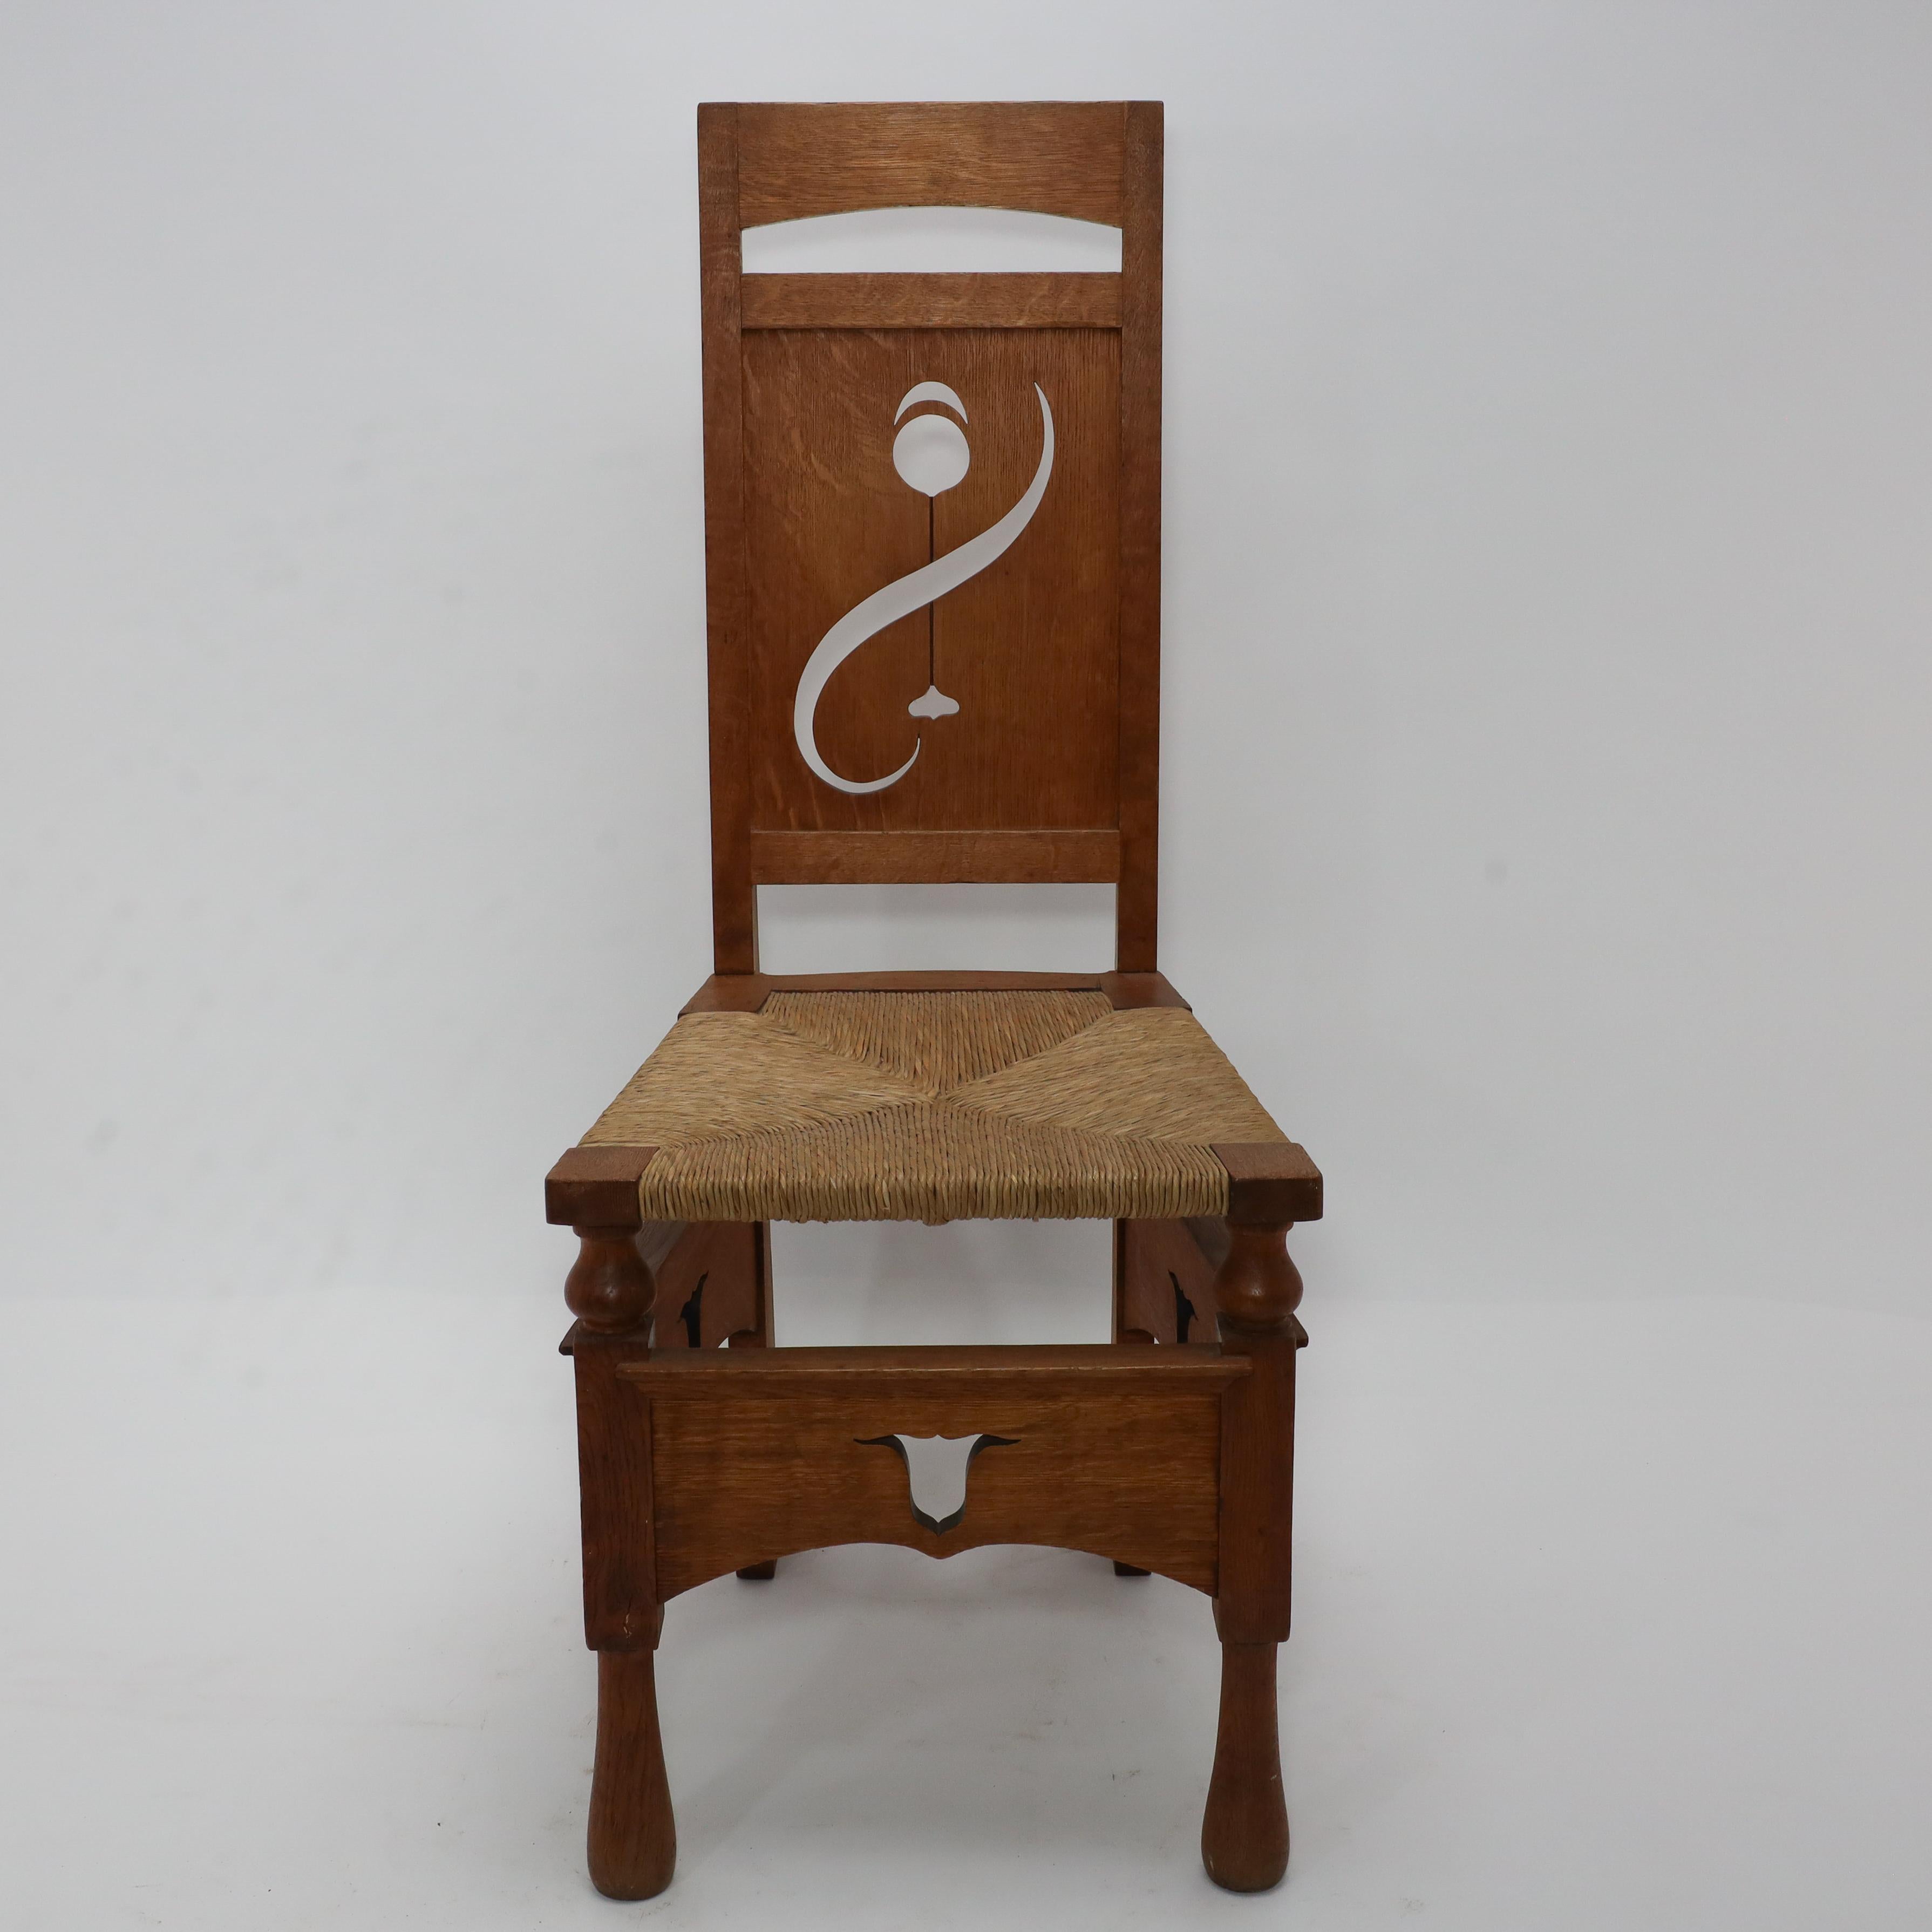 M H Baillie Scott attri, An Arts & Crafts Oak Chair With Stylised Floral Cut-Outs to the back and Pierced Tulips to the aprons below the front and the sides of the seat.
Une chaise très progressive dans son style et sa forme avec des détails tournés